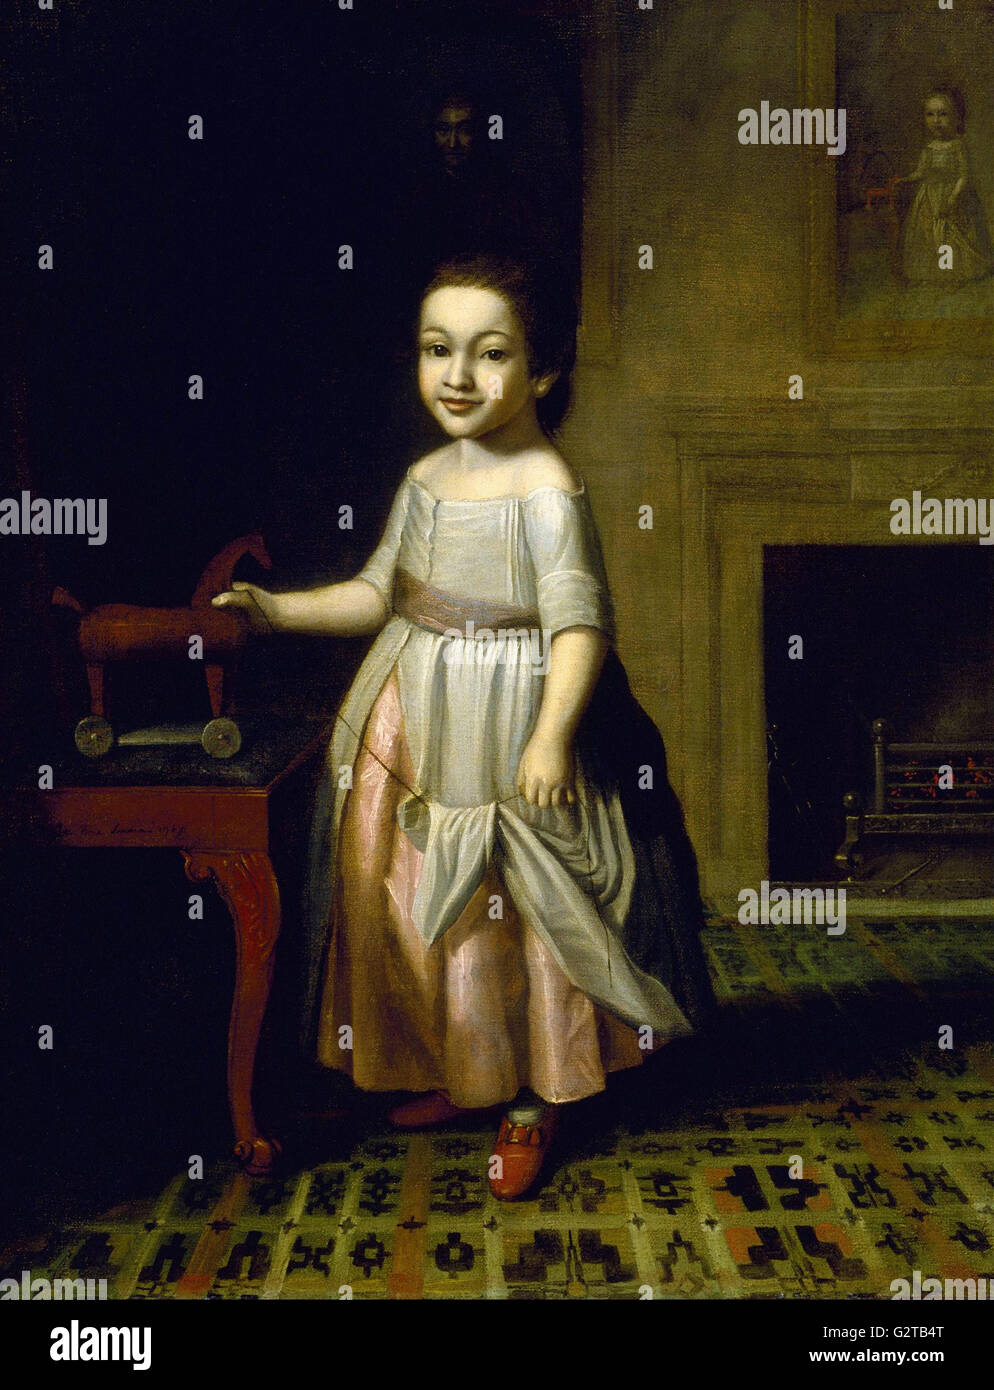 Charles Willson Peale - Boy with Toy Horse - Stock Photo